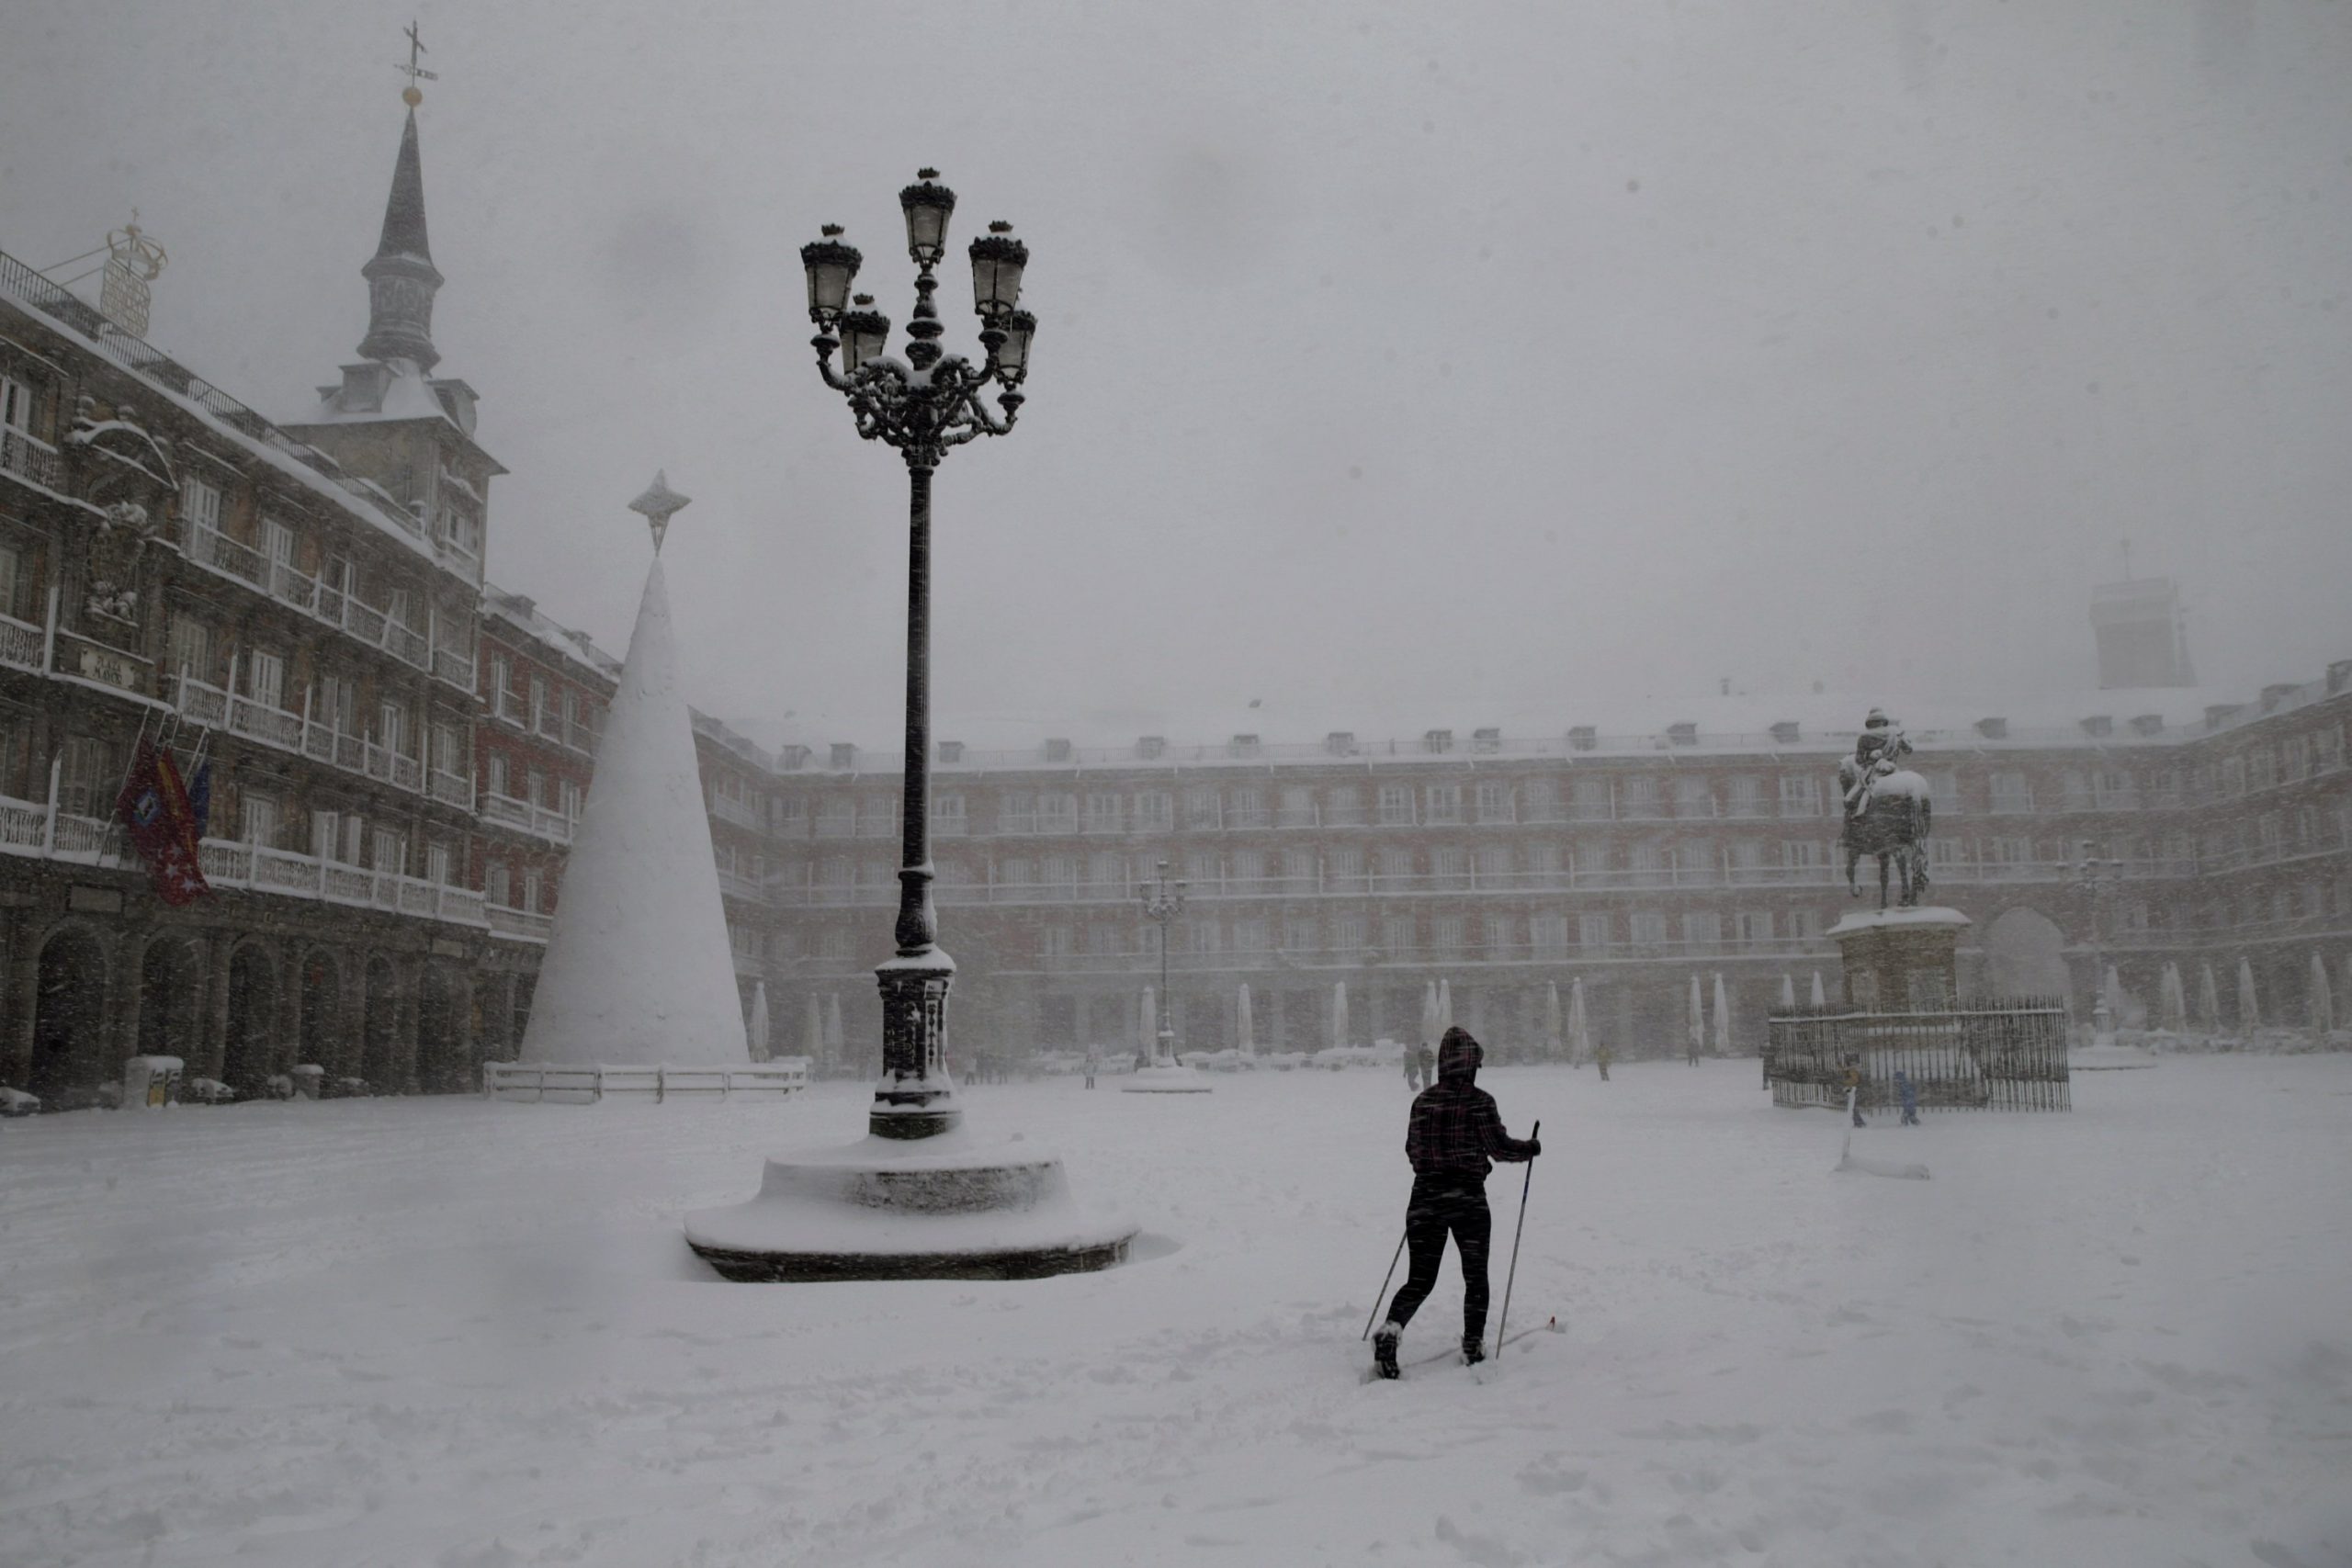 A blizzard killed 4 people and brought much of Spain to a standstill